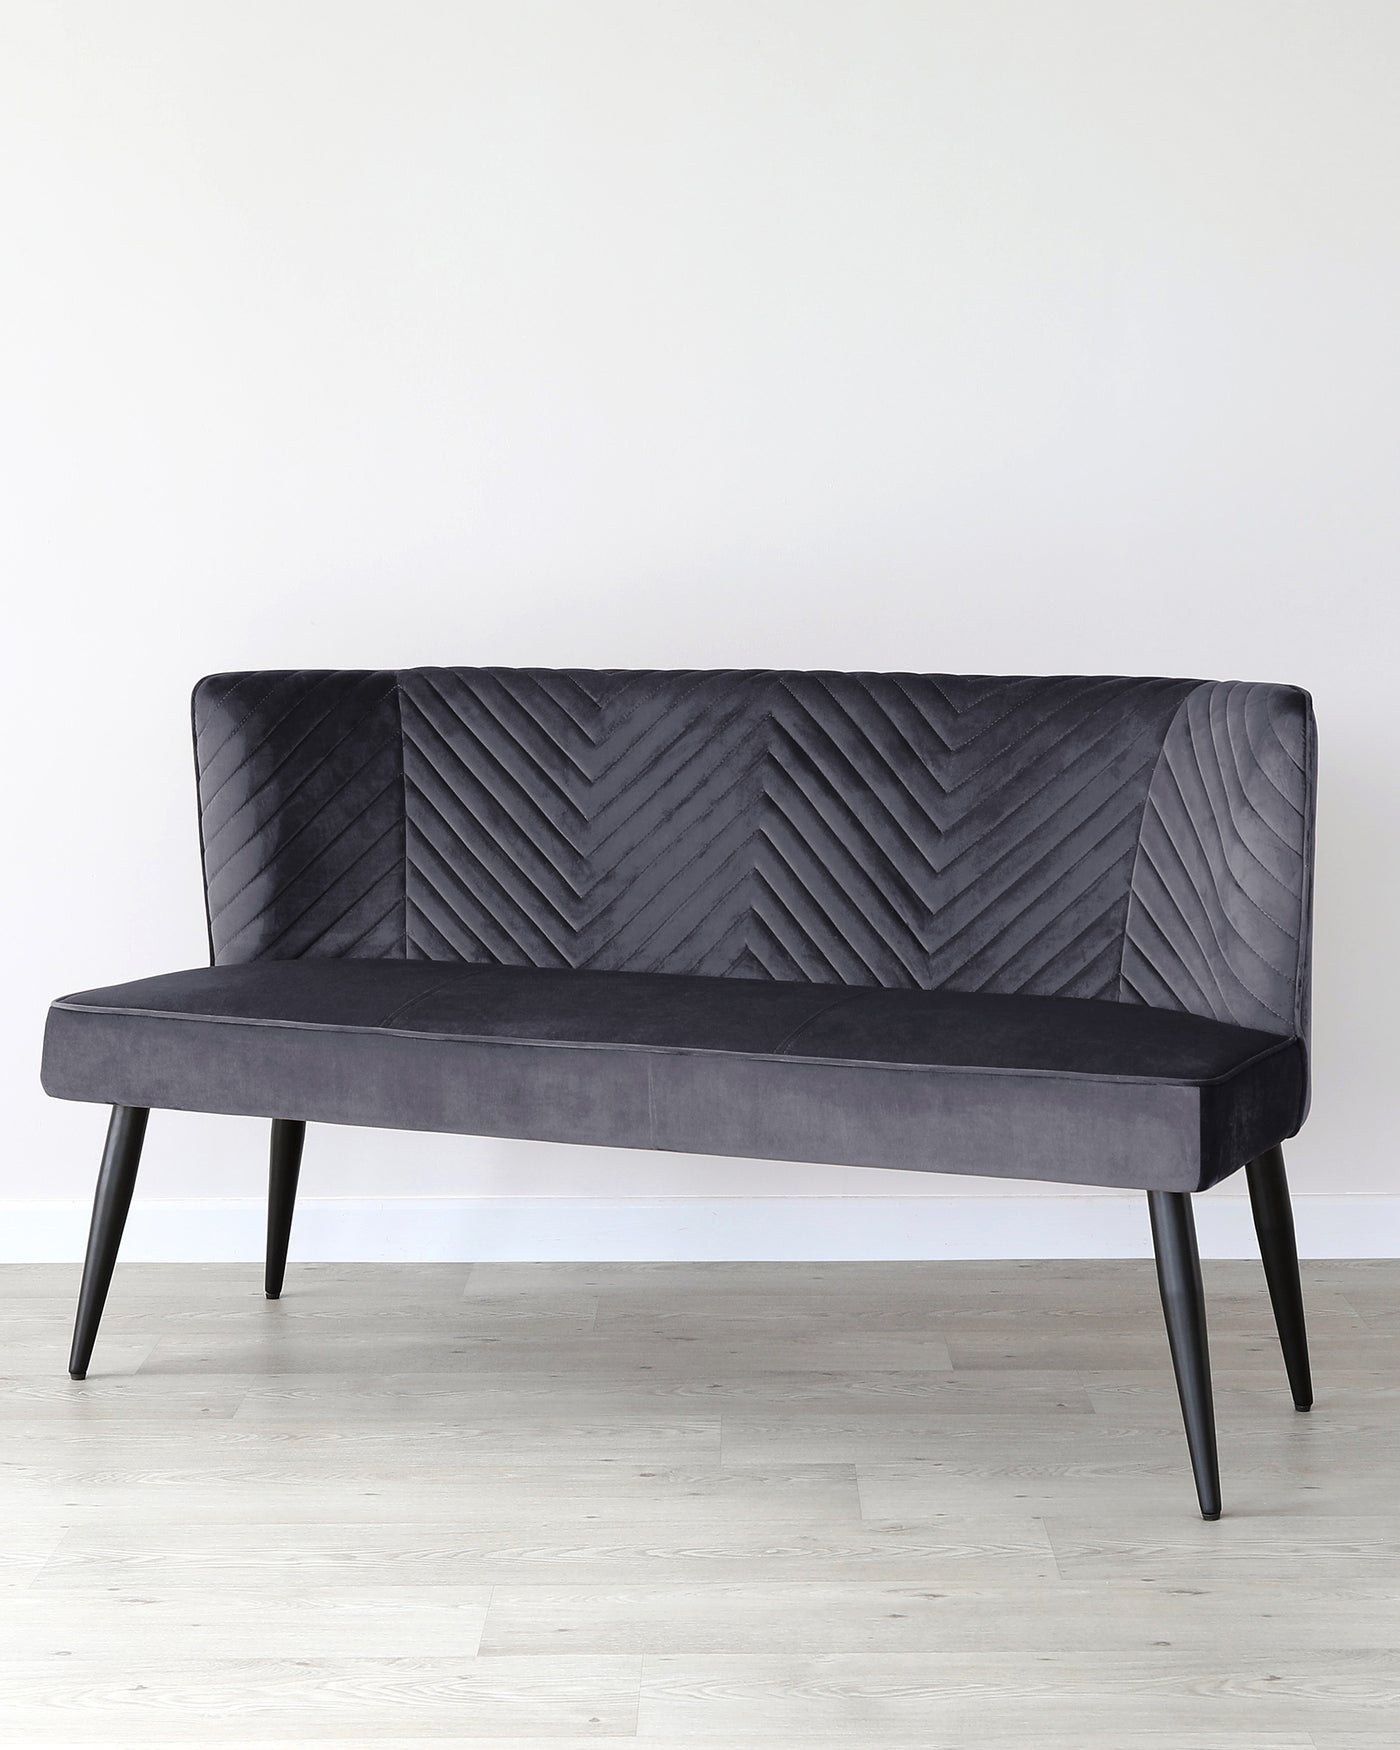 Elegant contemporary sofa with a tufted chevron pattern on the backrest, upholstered in a dark grey fabric, and supported by four angled black legs.